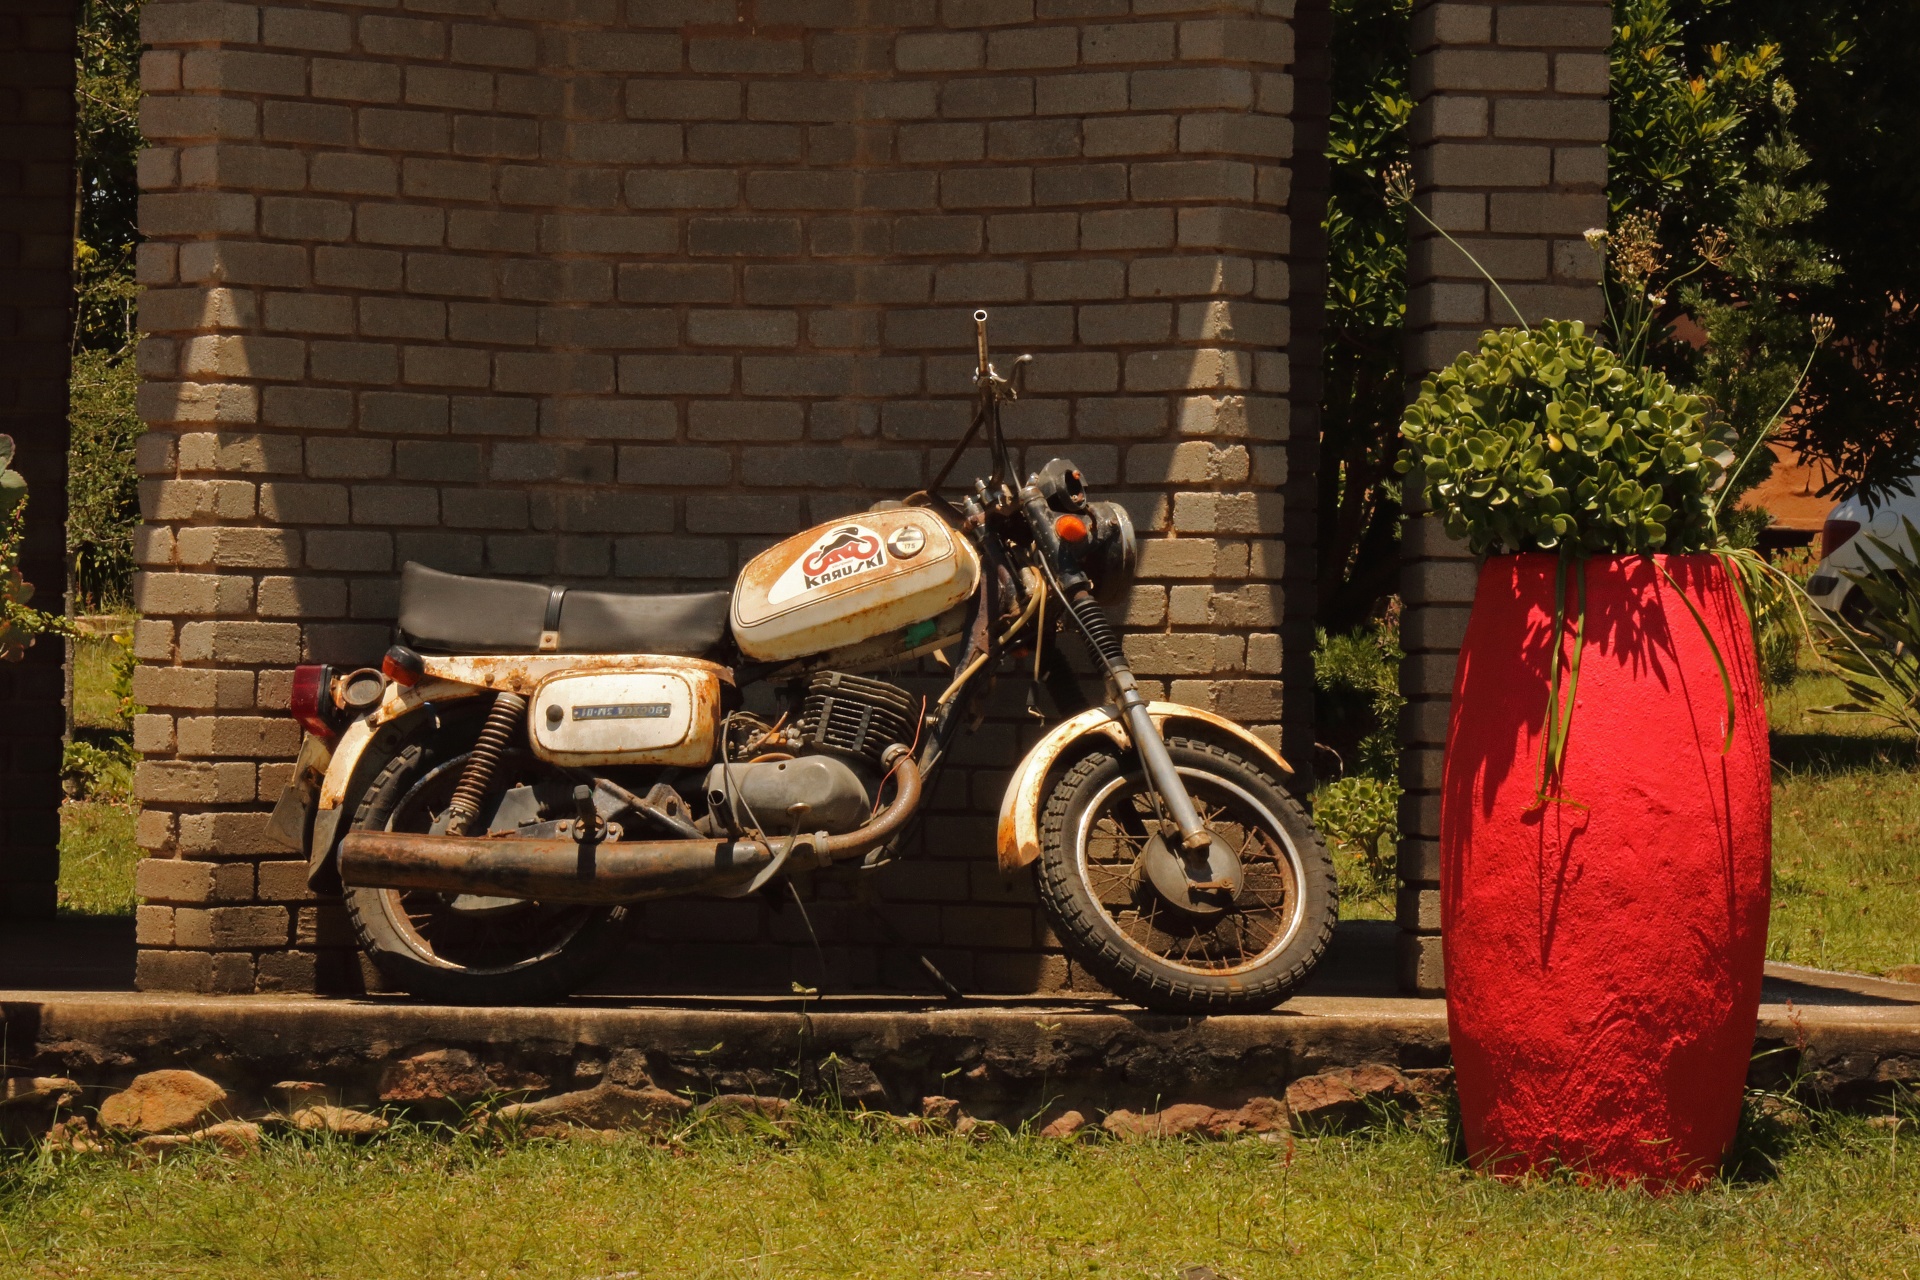 Old Motor Cycle Displayed In Garden